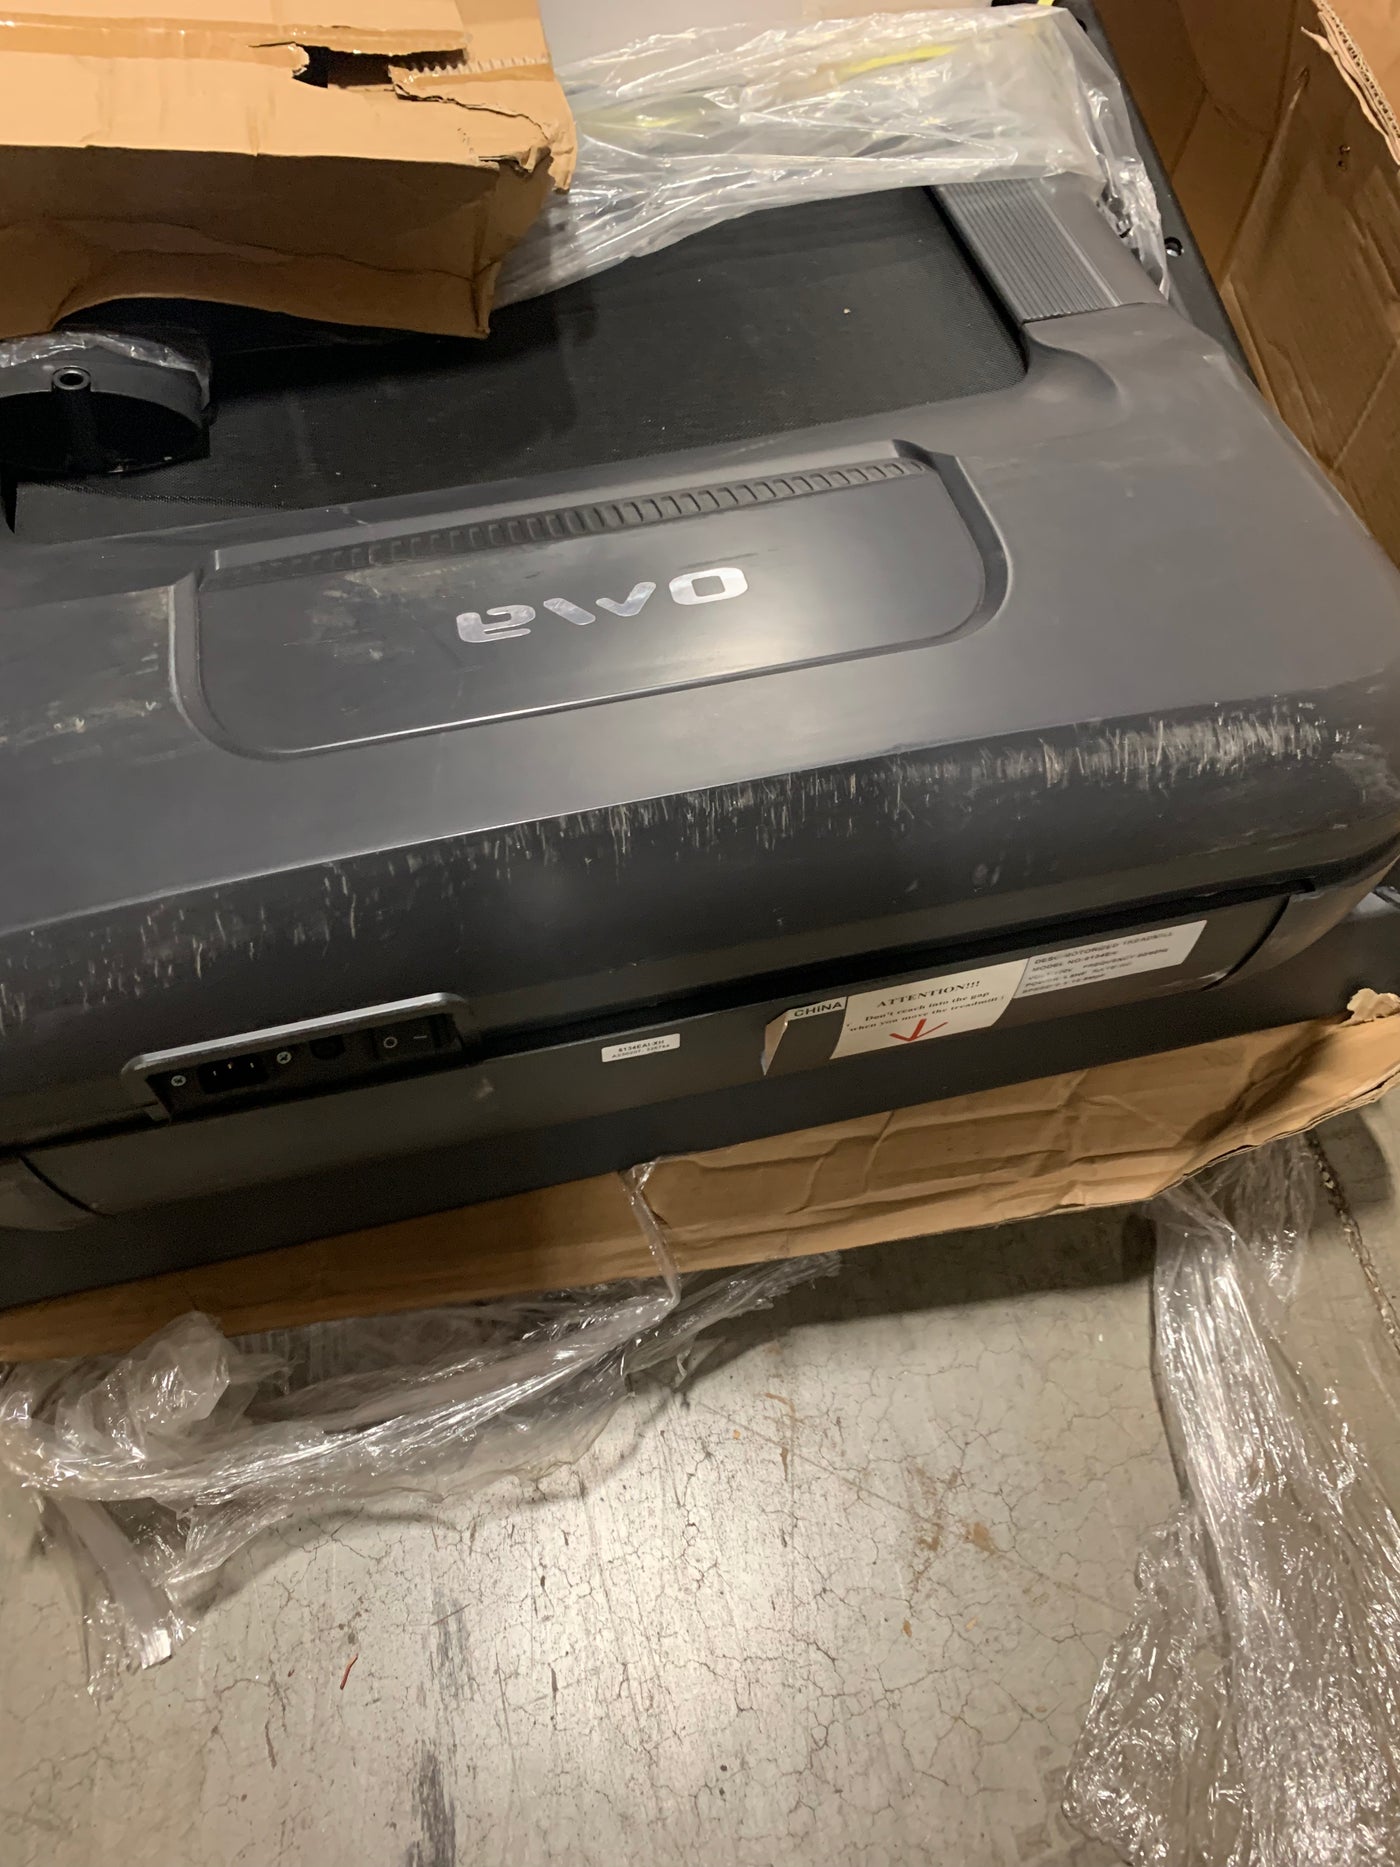 OMA Treadmills for Home, Folding Treadmill with 15% Auto Incline (Some Scratches) - $650